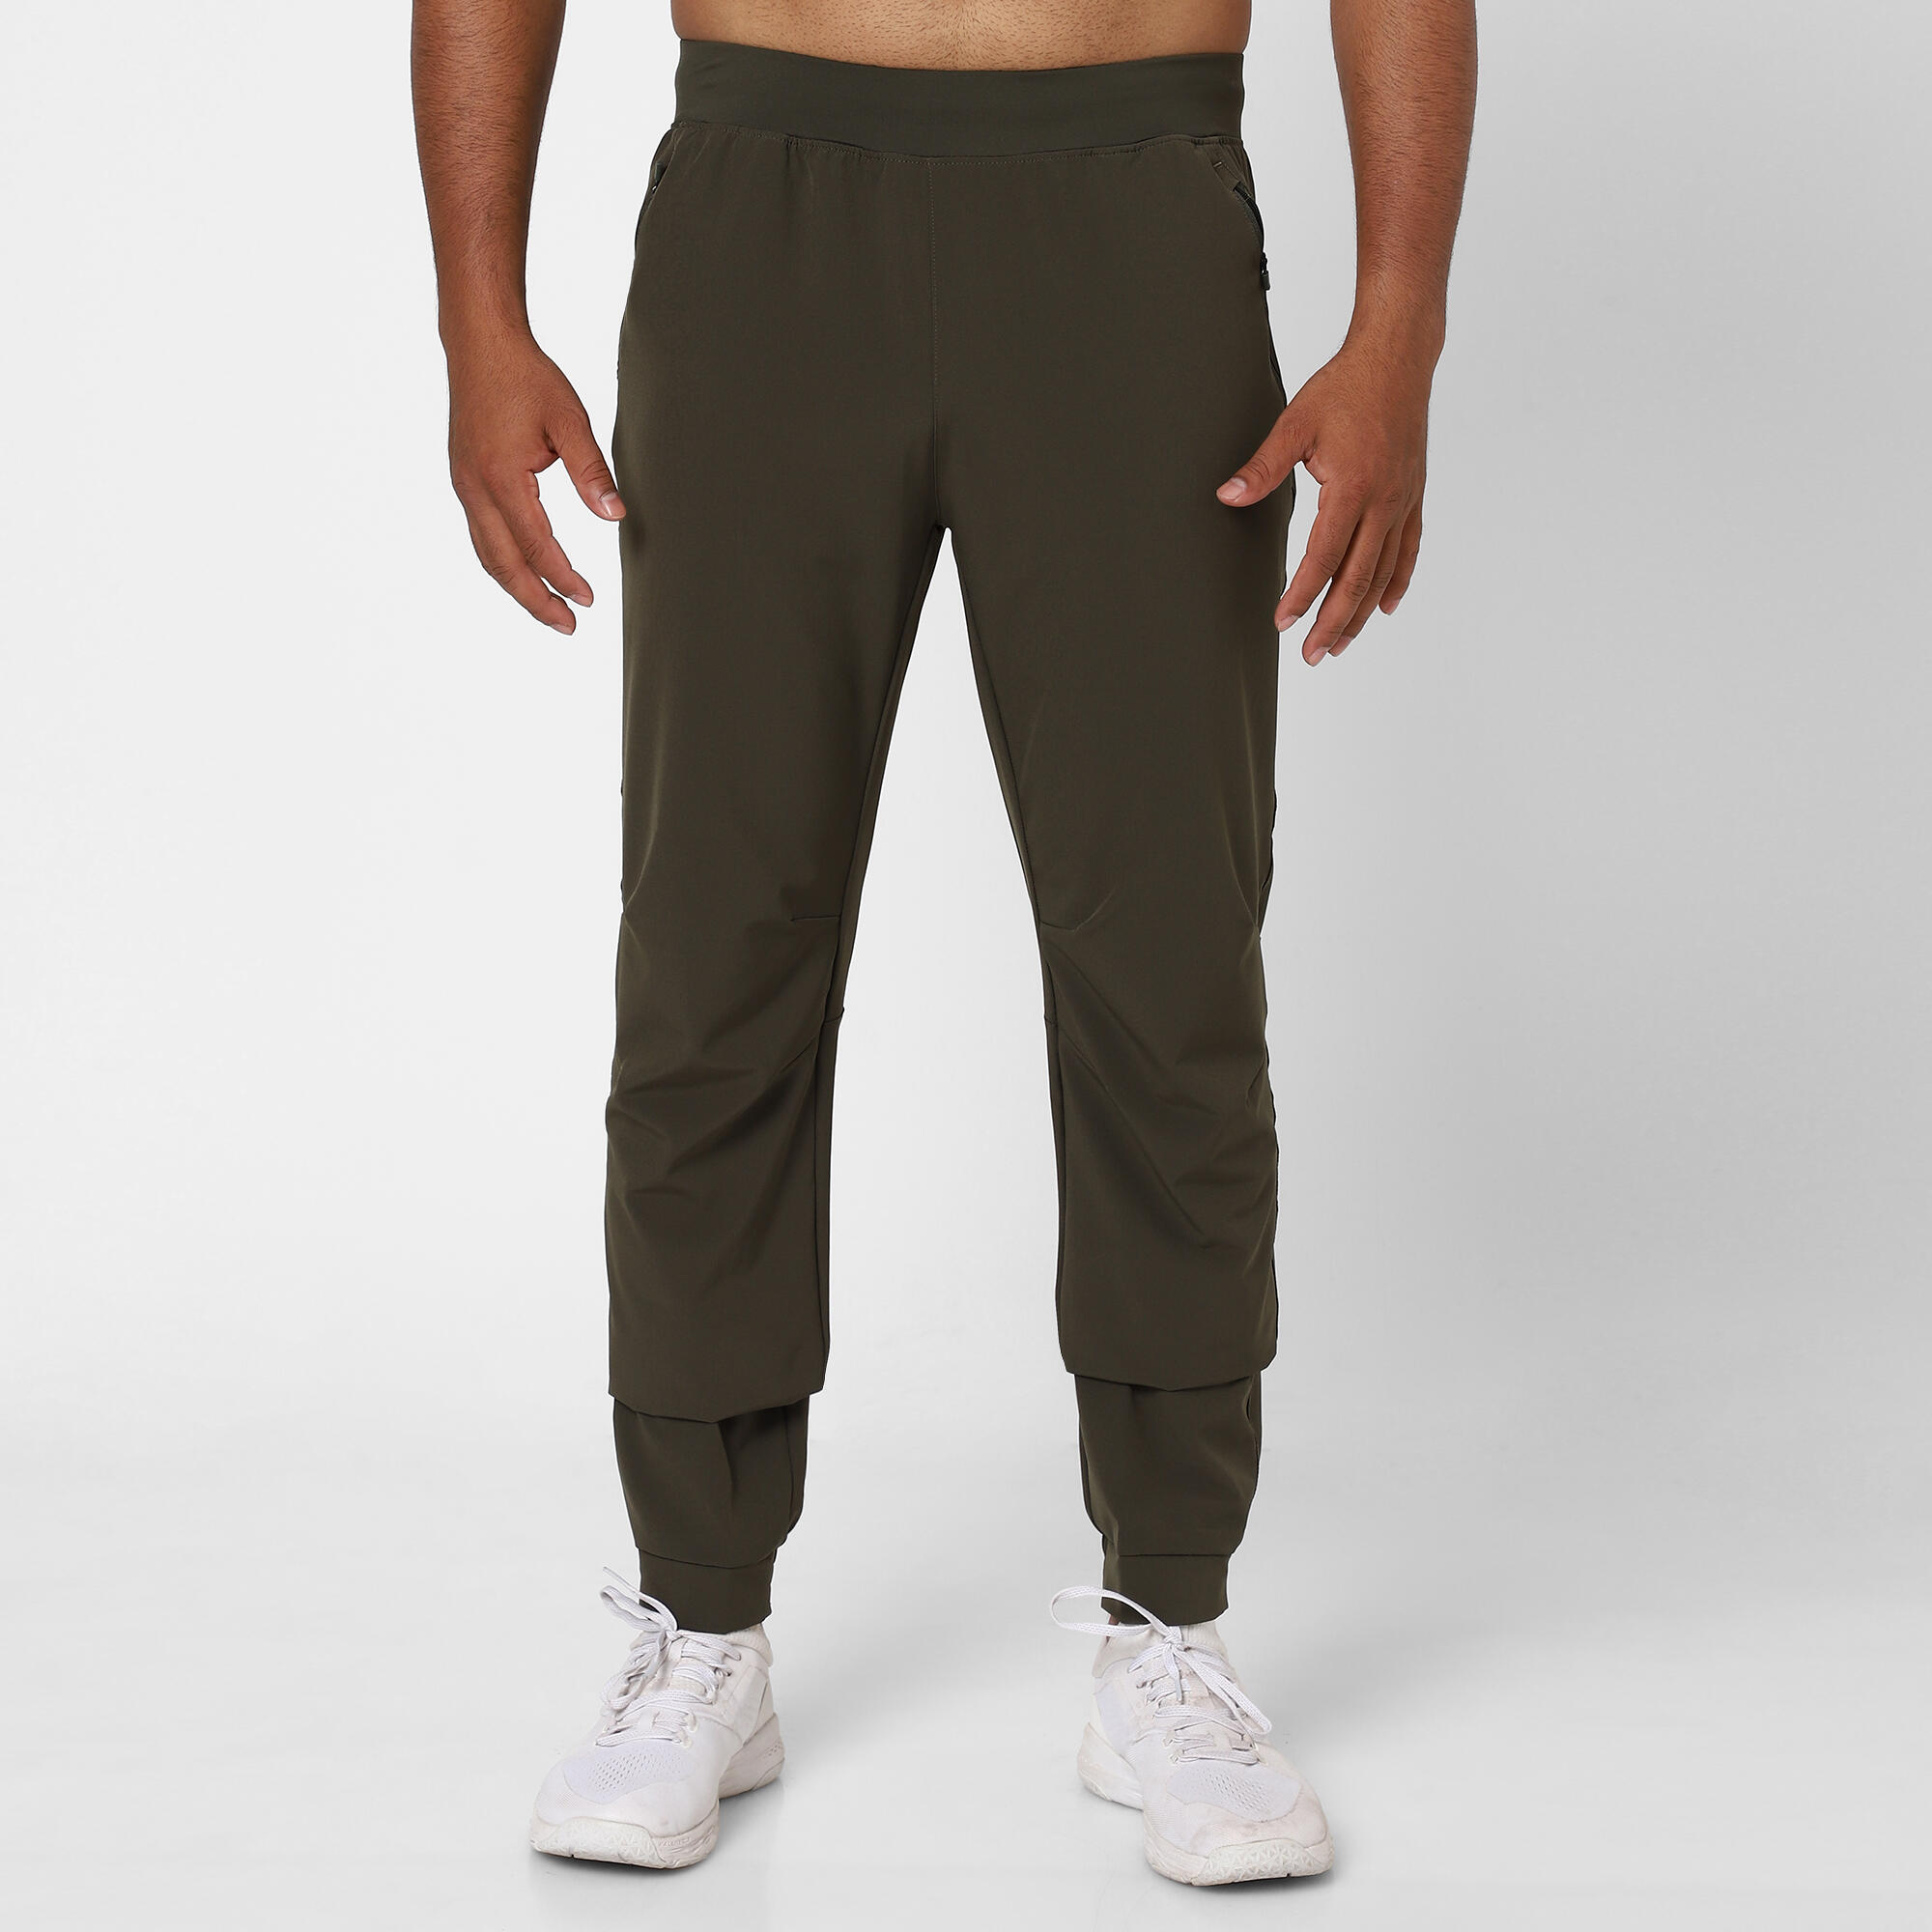 Buy Men Polyester Non-Stretchable Gym Track Pants - Navy Blue Online |  Decathlon